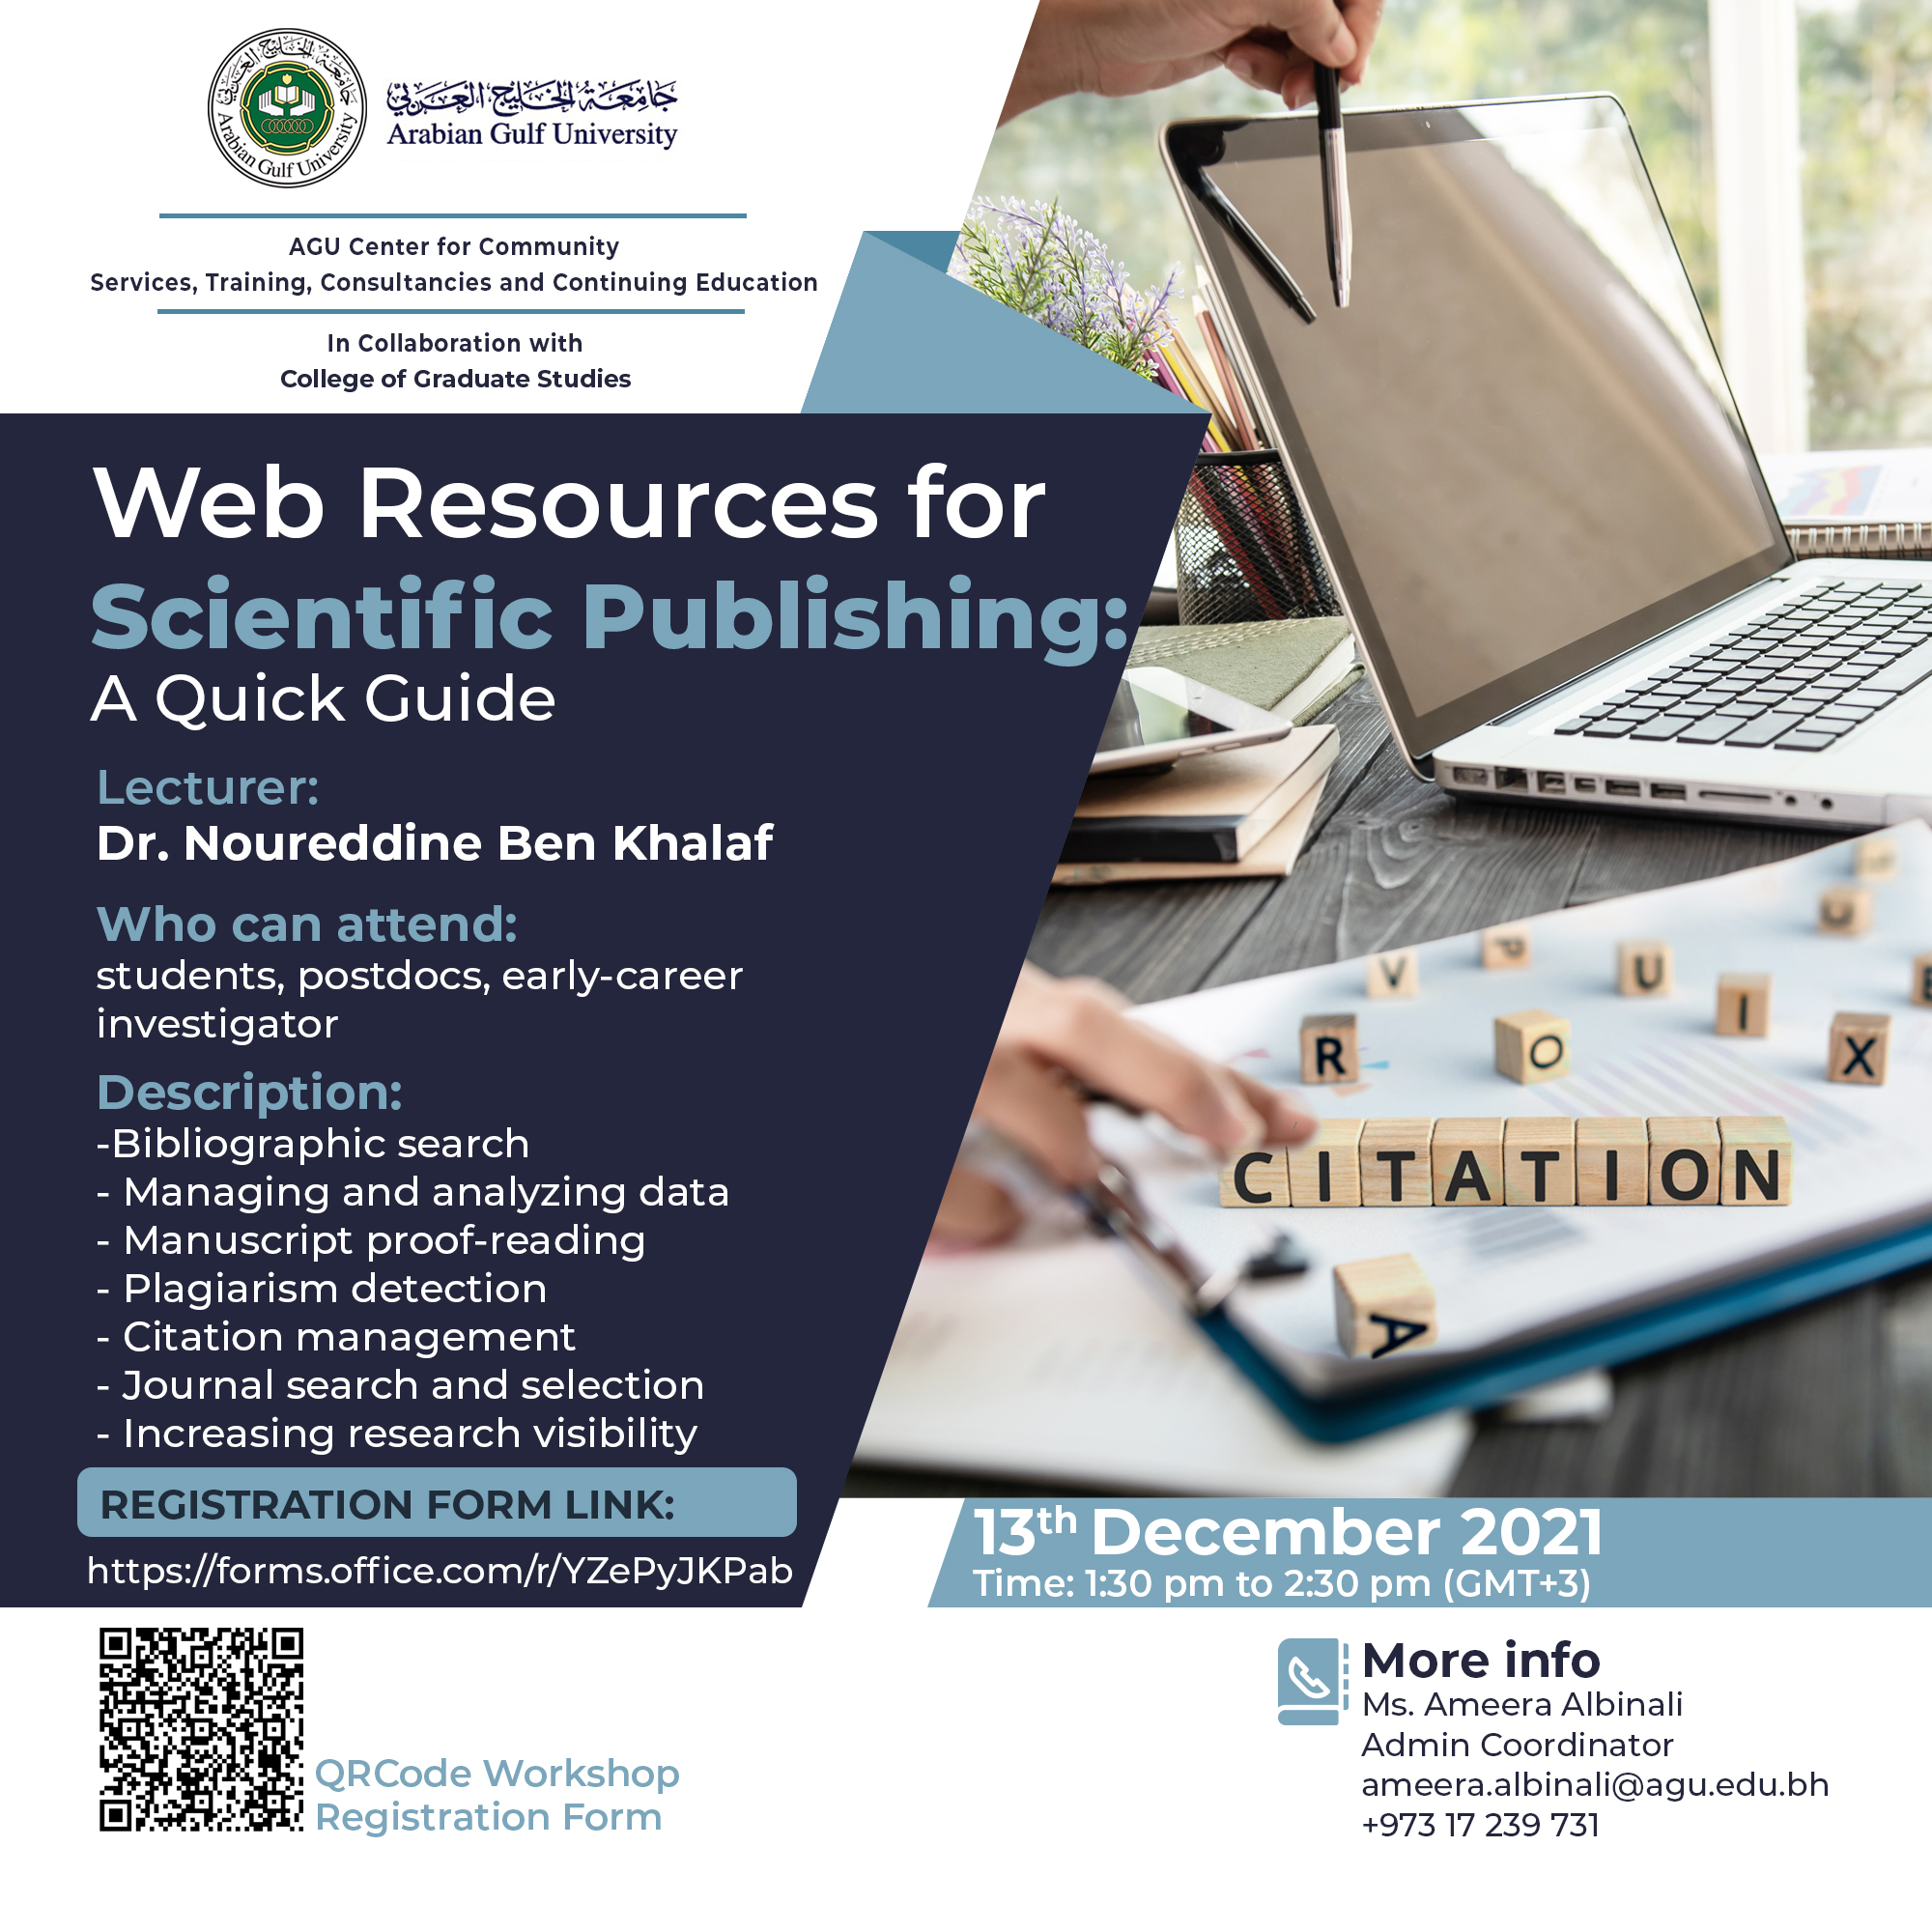 Web Resources for Scientific Publishing: A Quick Guide